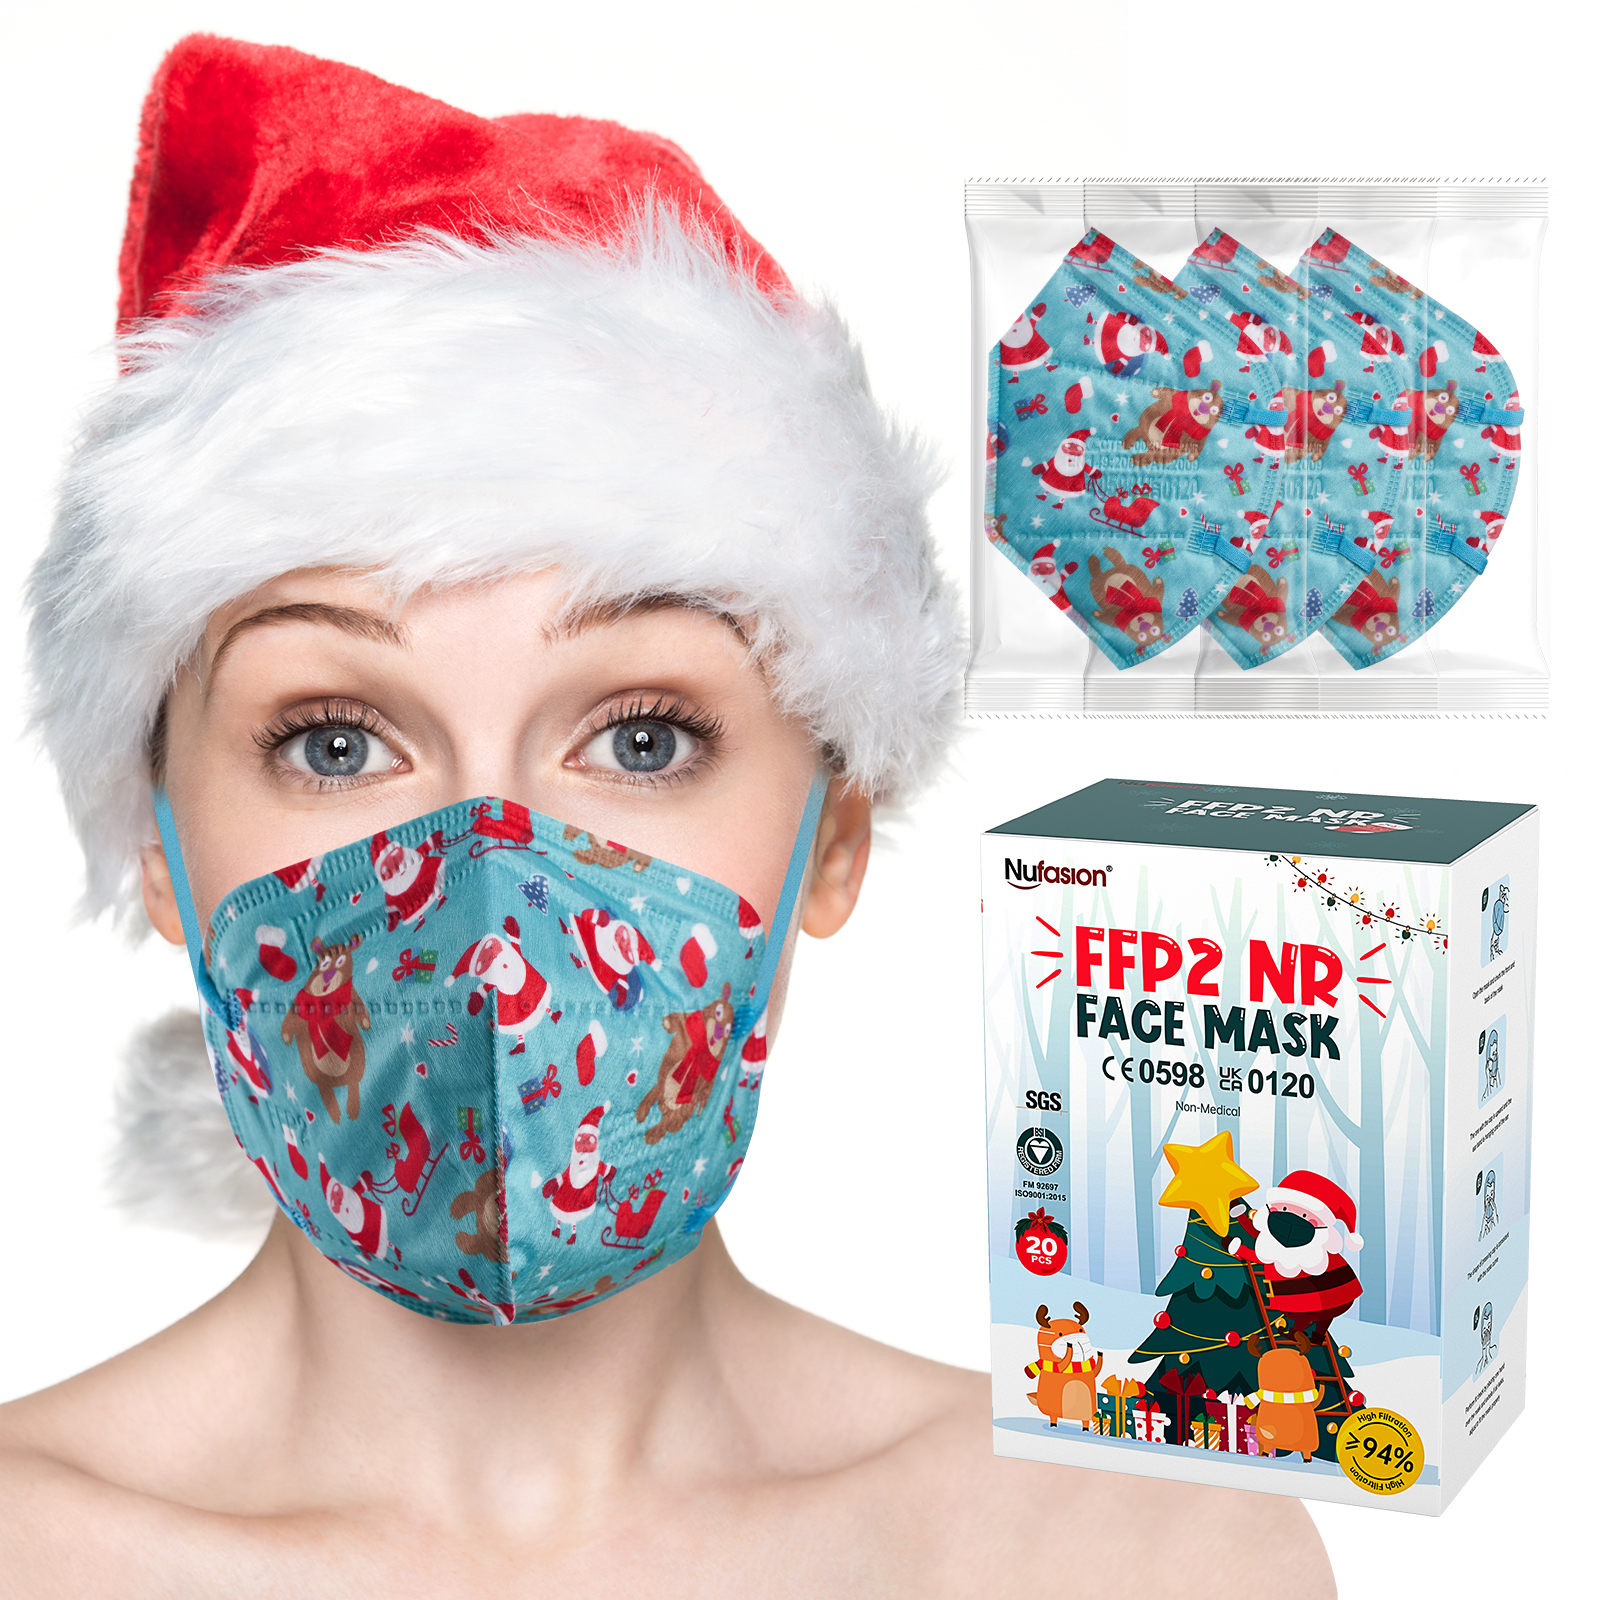 School board's face mask policy